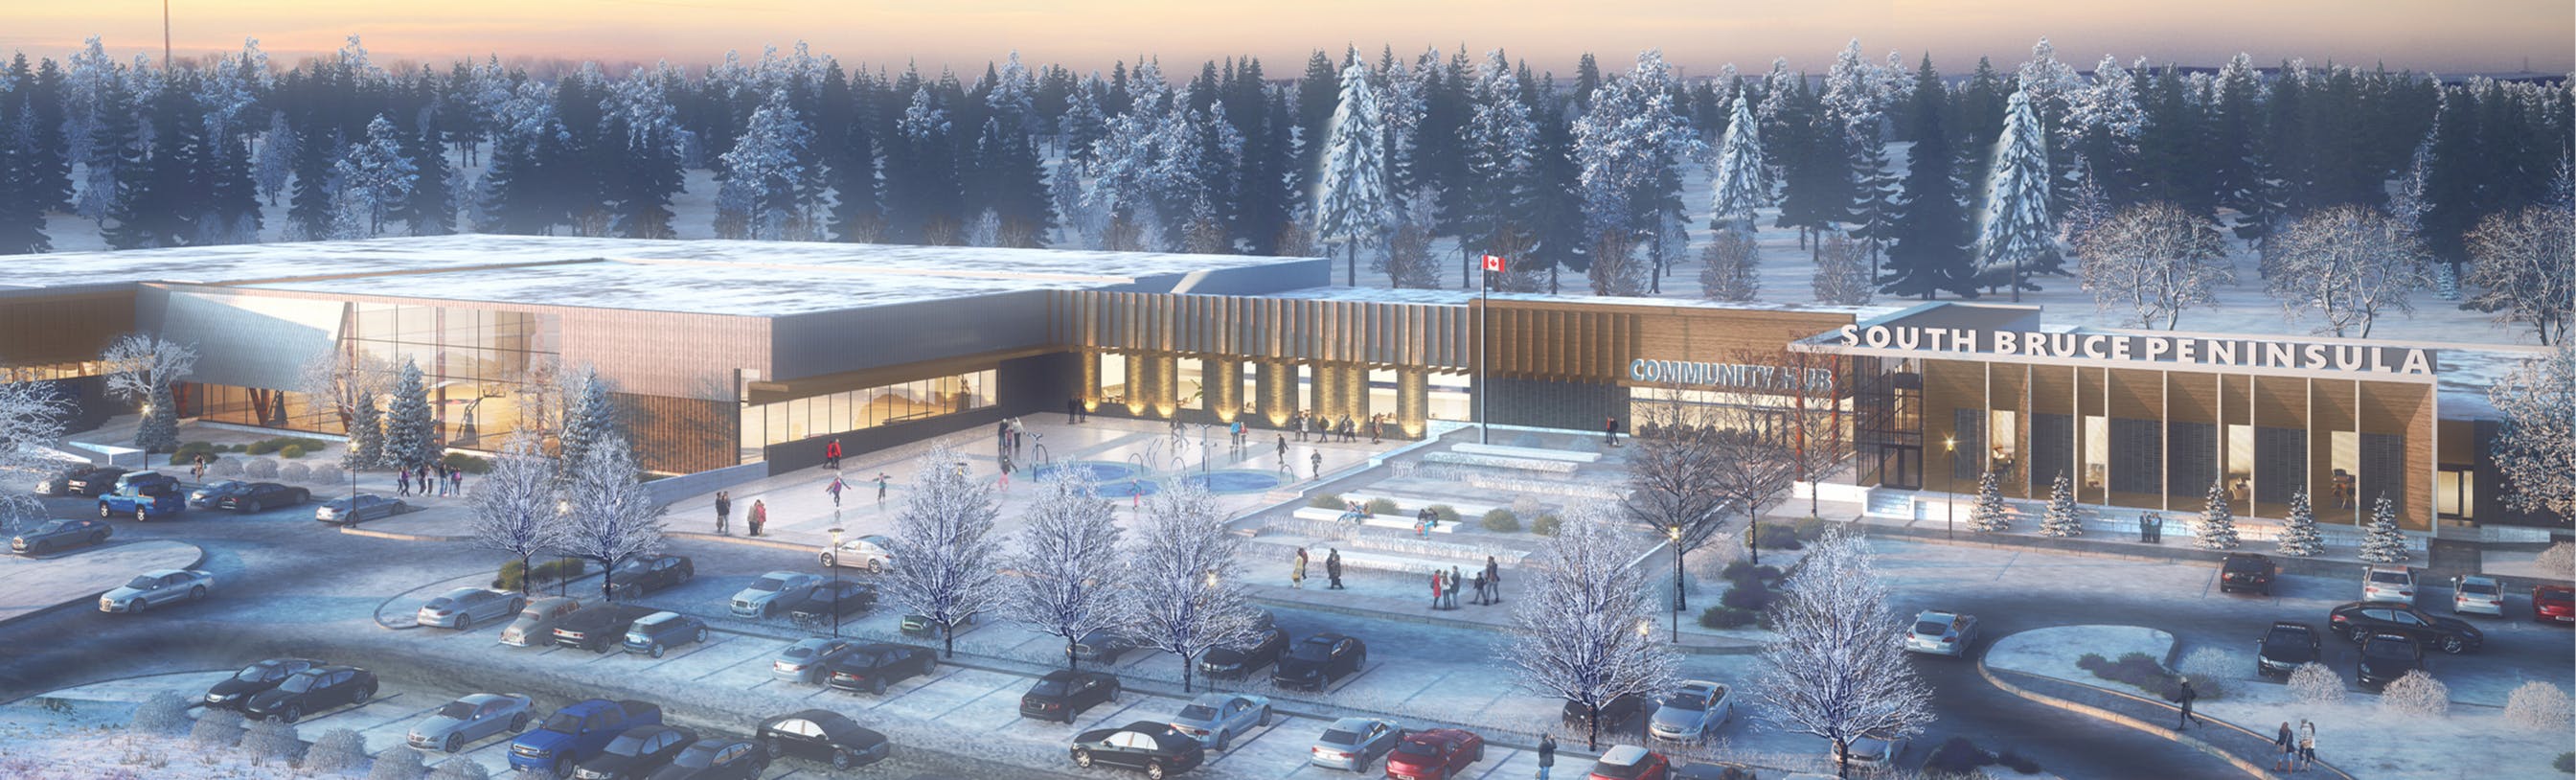 A rendering of the conceptual layout of the Community Hub set in the winter against a setting sun